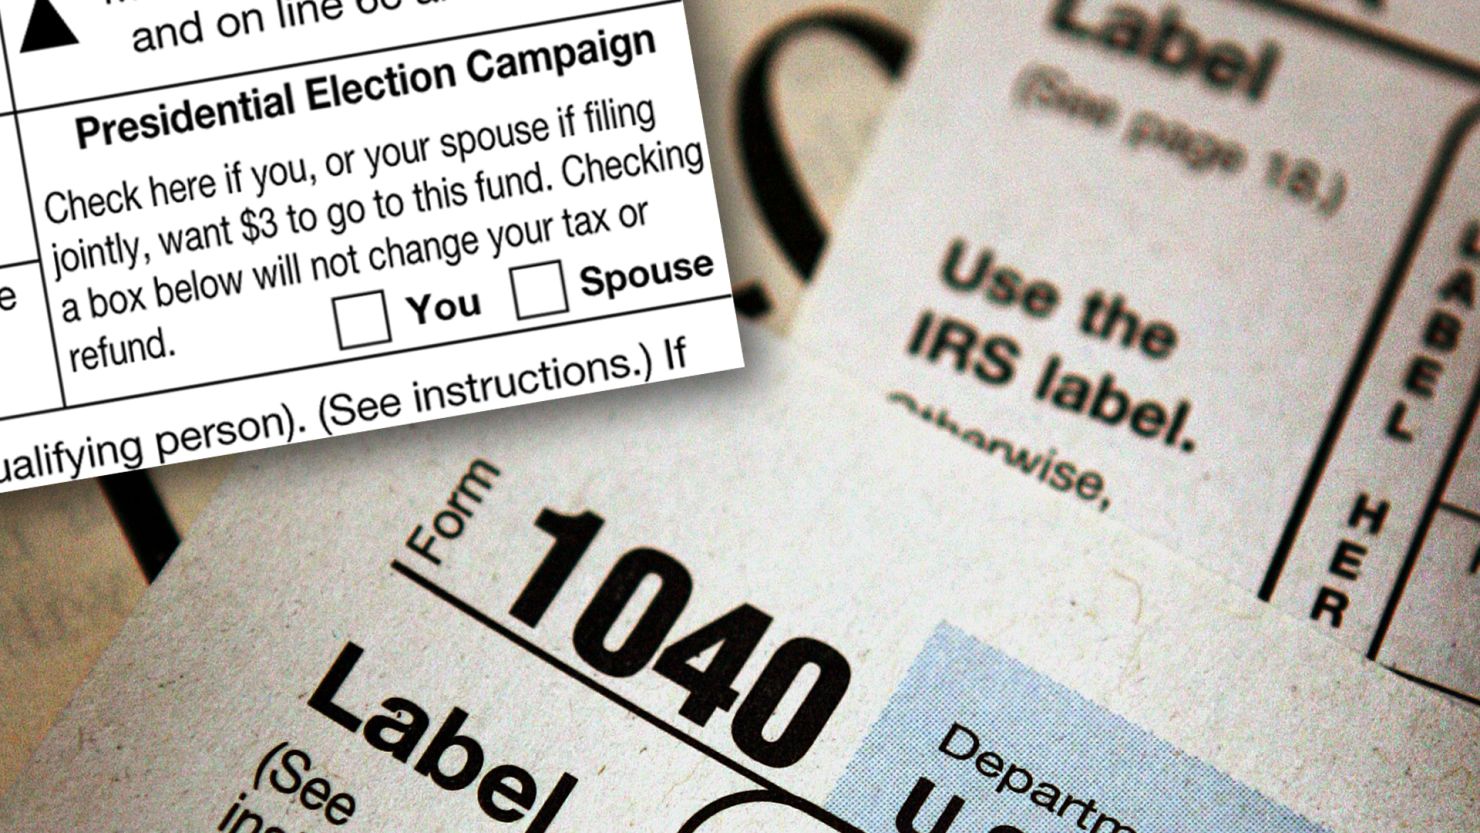 IRS form presidential checkoff